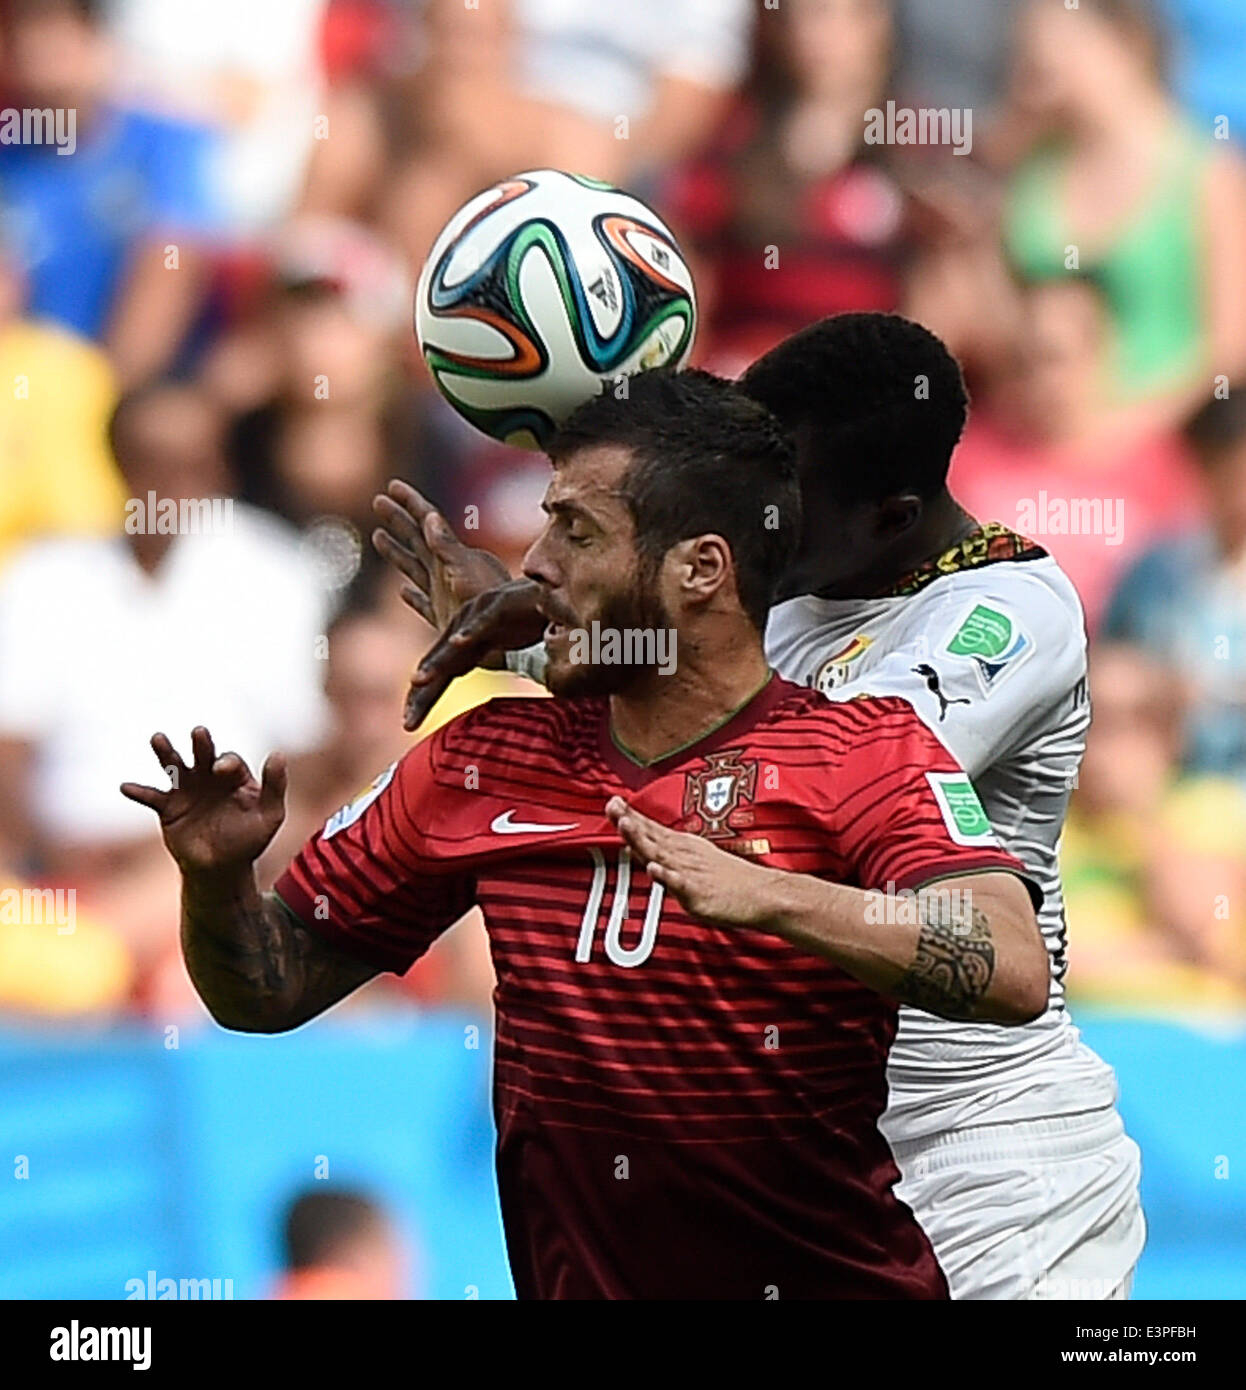 Brasilia, Brazil. 26th June, 2014. Portugal's Vieirinha (front) competes for a header during a Group G match between Portugal and Ghana of 2014 FIFA World Cup at the Estadio Nacional Stadium in Brasilia, Brazil, June 26, 2014. Portugal won 2-1 over Ghana on Thursday. © Qi Heng/Xinhua/Alamy Live News Stock Photo